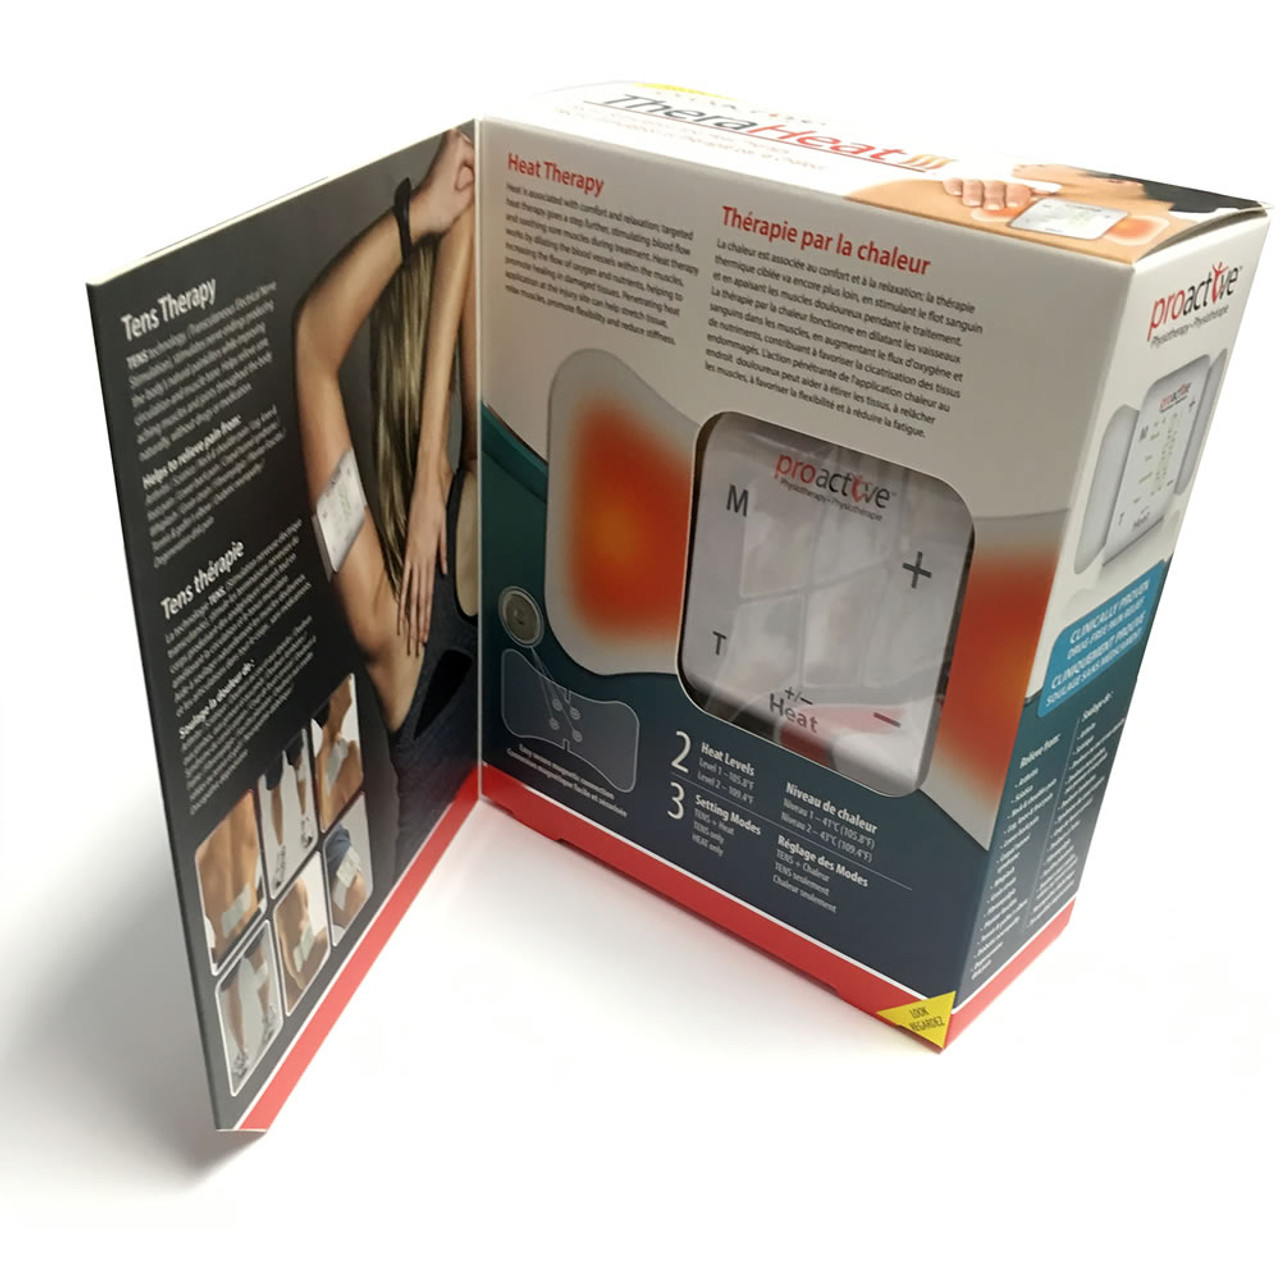 Proactive TheraHeat TENS and Heat Therapy Device